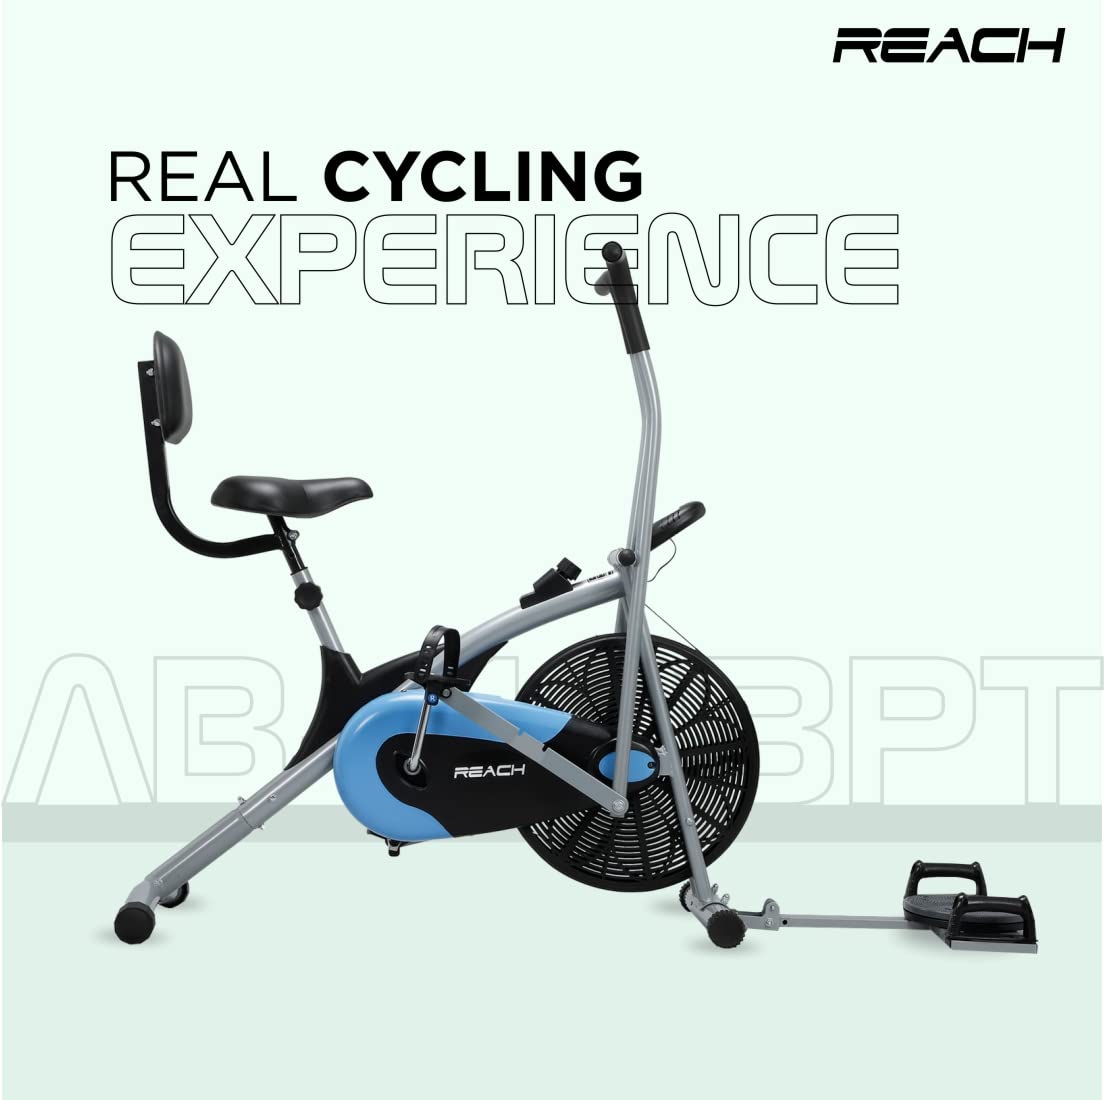 Reach AB-110 BPT Air Bike Exercise Cycle for Home Gym  with Push Up Bar  Twister  Adjustable Resistance  Seat with Back Support  Fitness Machine with Moving  Stationary Handles